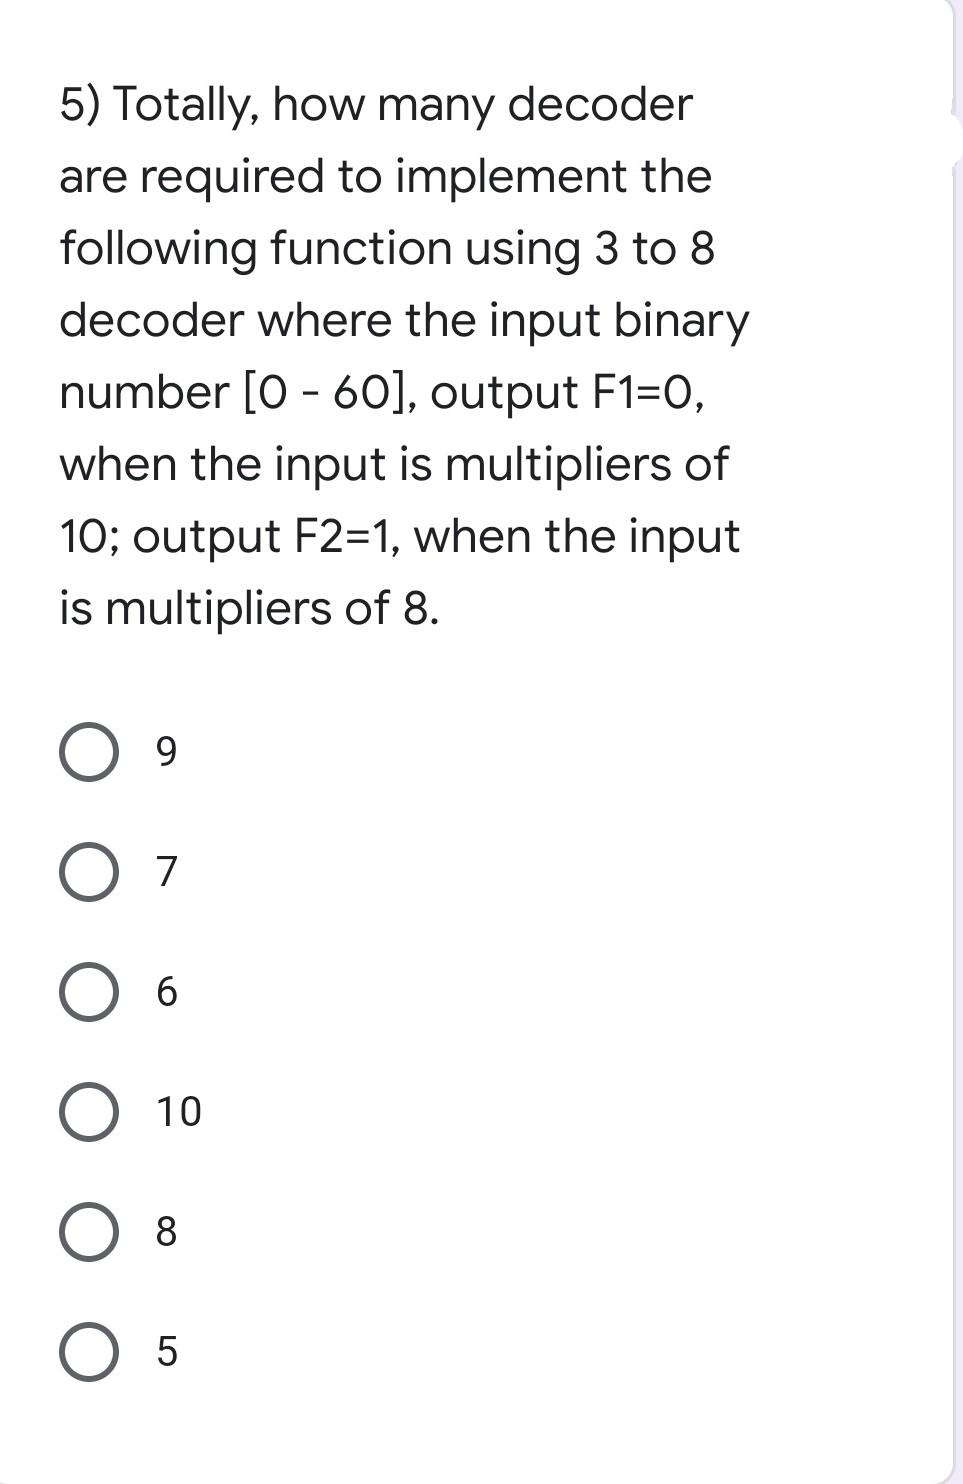 5) Totally, how many decoder
are required to implement the
following function using 3 to 8
decoder where the input binary
number [0 - 60], output F1=0,
when the input is multipliers of
10; output F2=1, when the input
is multipliers of 8.
9.
7
6
10
8
O 5
